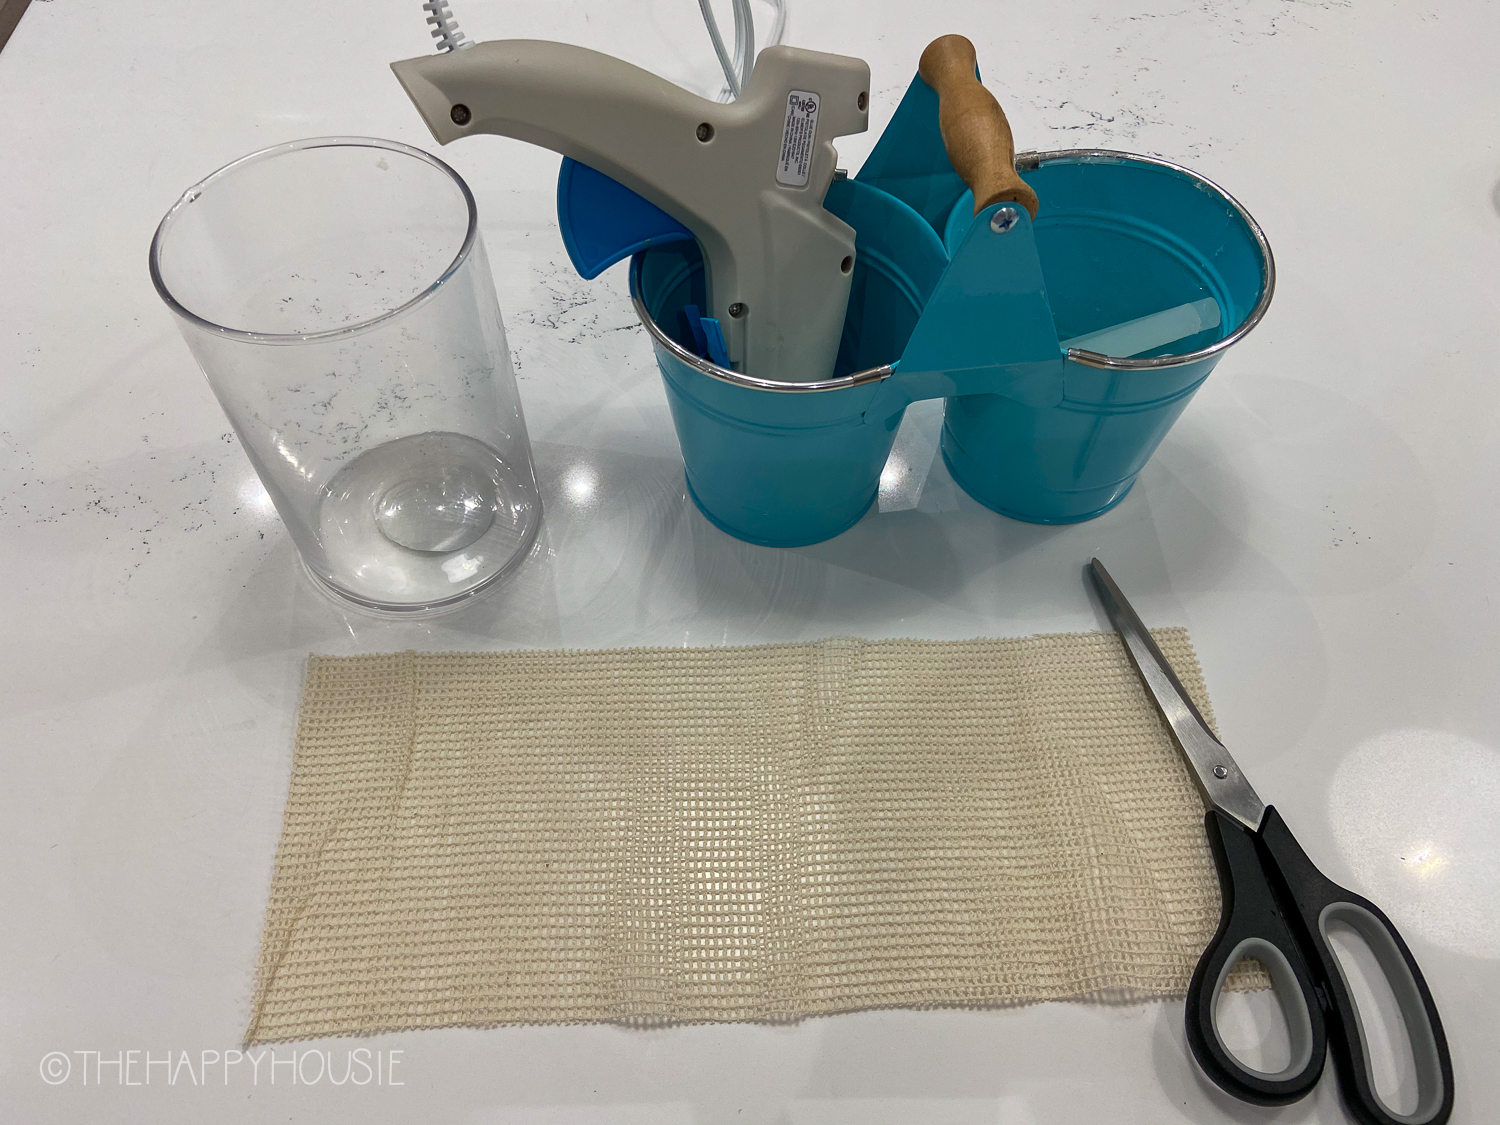 The mesh is beside the scissors and a glass.